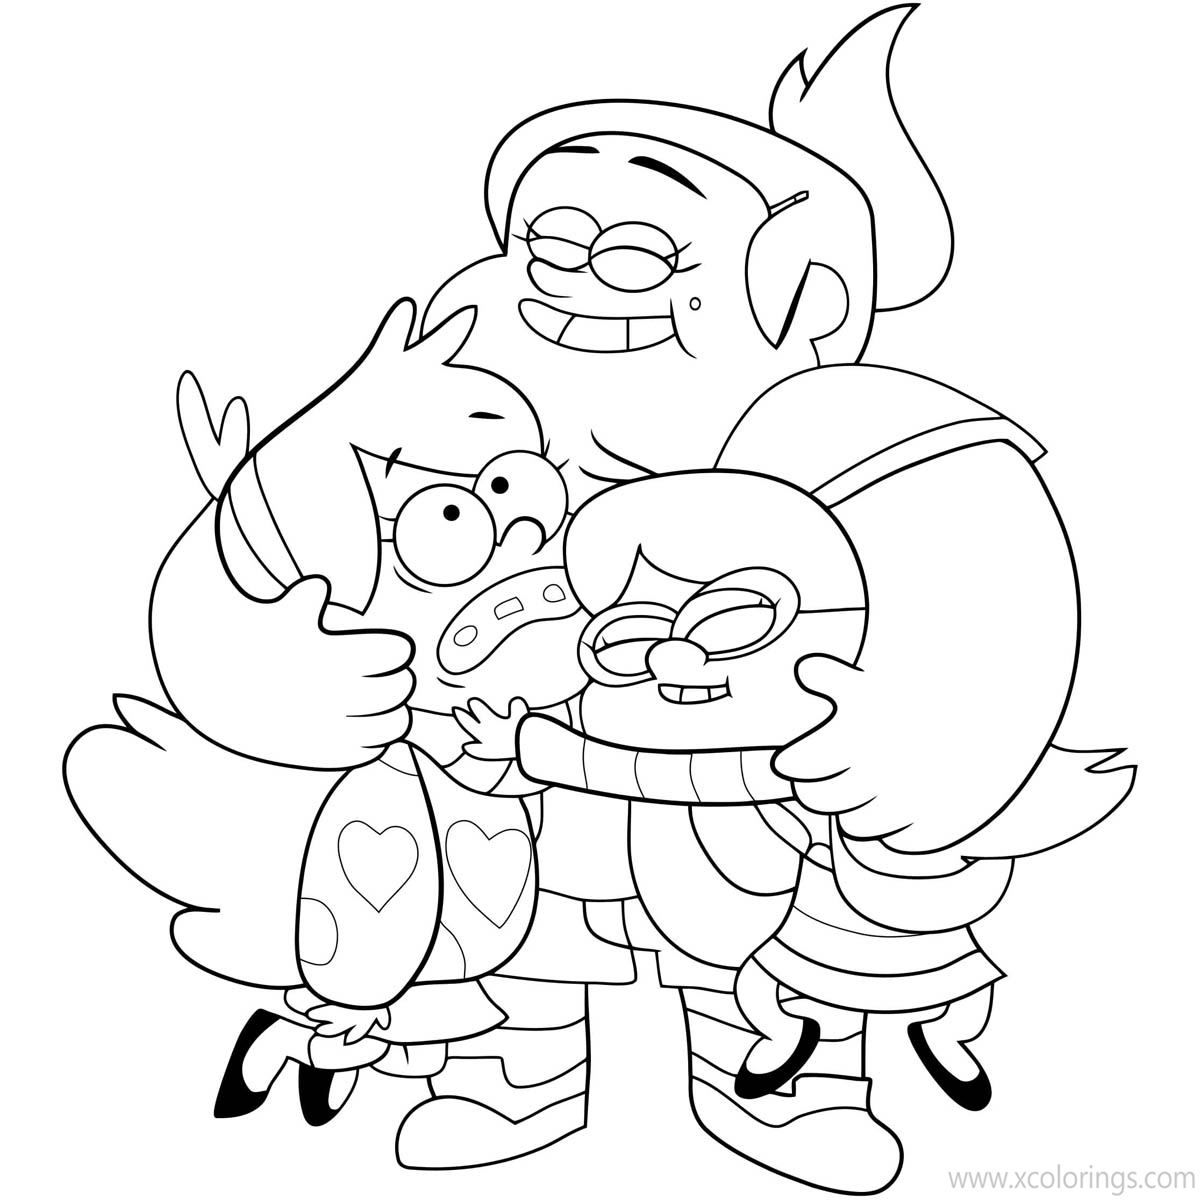 Free Gravity Falls Coloring Pages Libra with Mabel and Candy printable